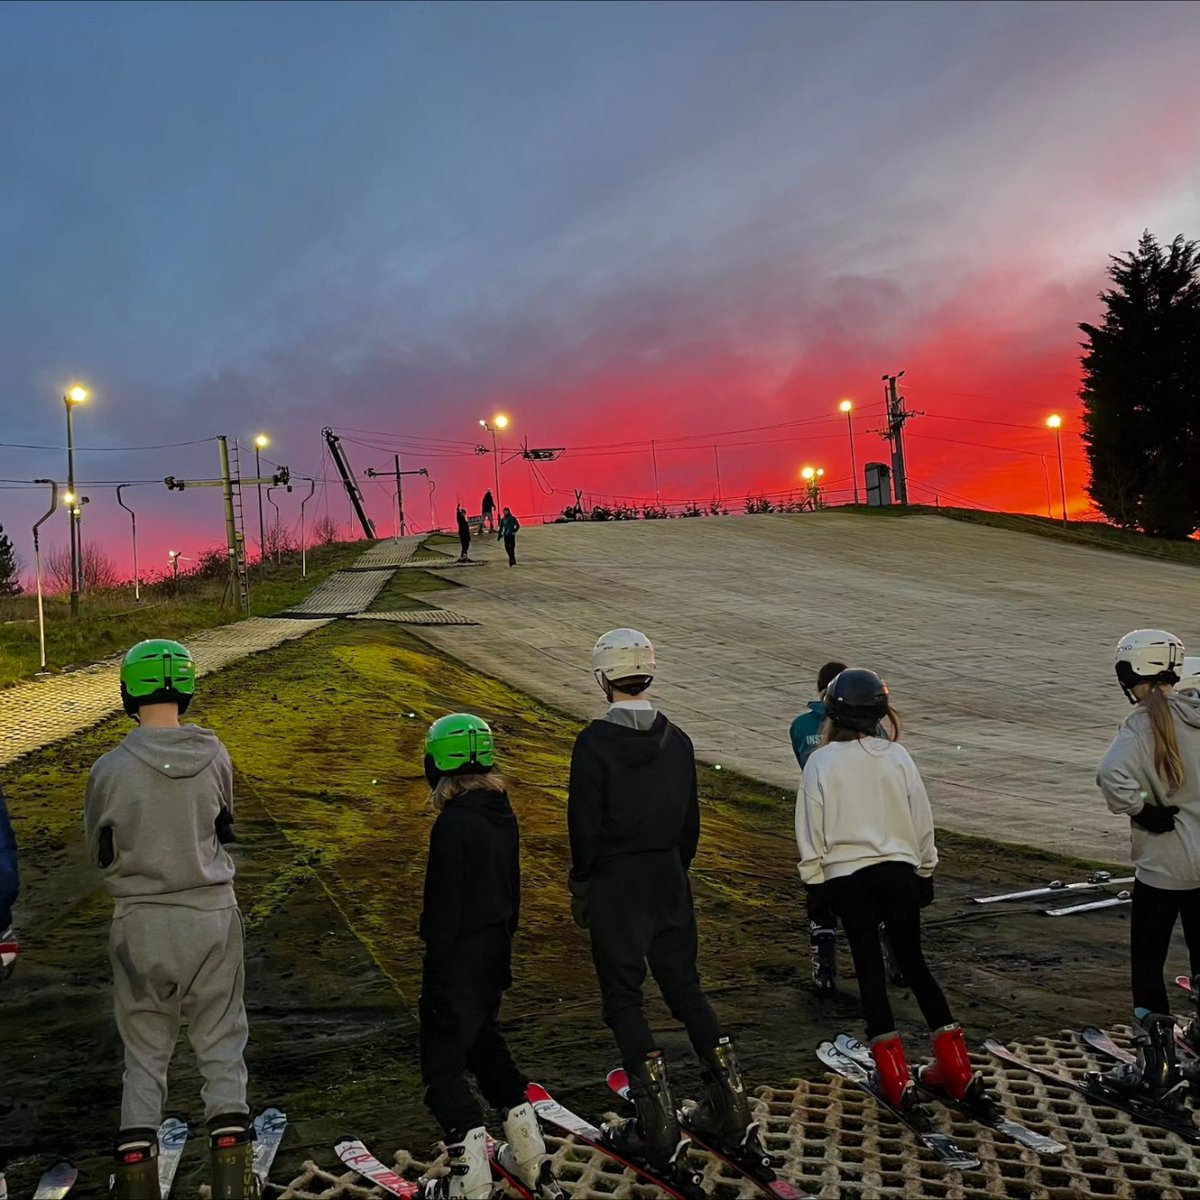 🎿 Kicking off our ski lessons at Swadlincote with breathtaking sunset views! 🌄 All our students made fantastic progress today. Excitement is building for our upcoming Easter trip to Italy! 🇮🇹 #SkiingAdventures #SwadlincoteSlopes #EasterInItaly